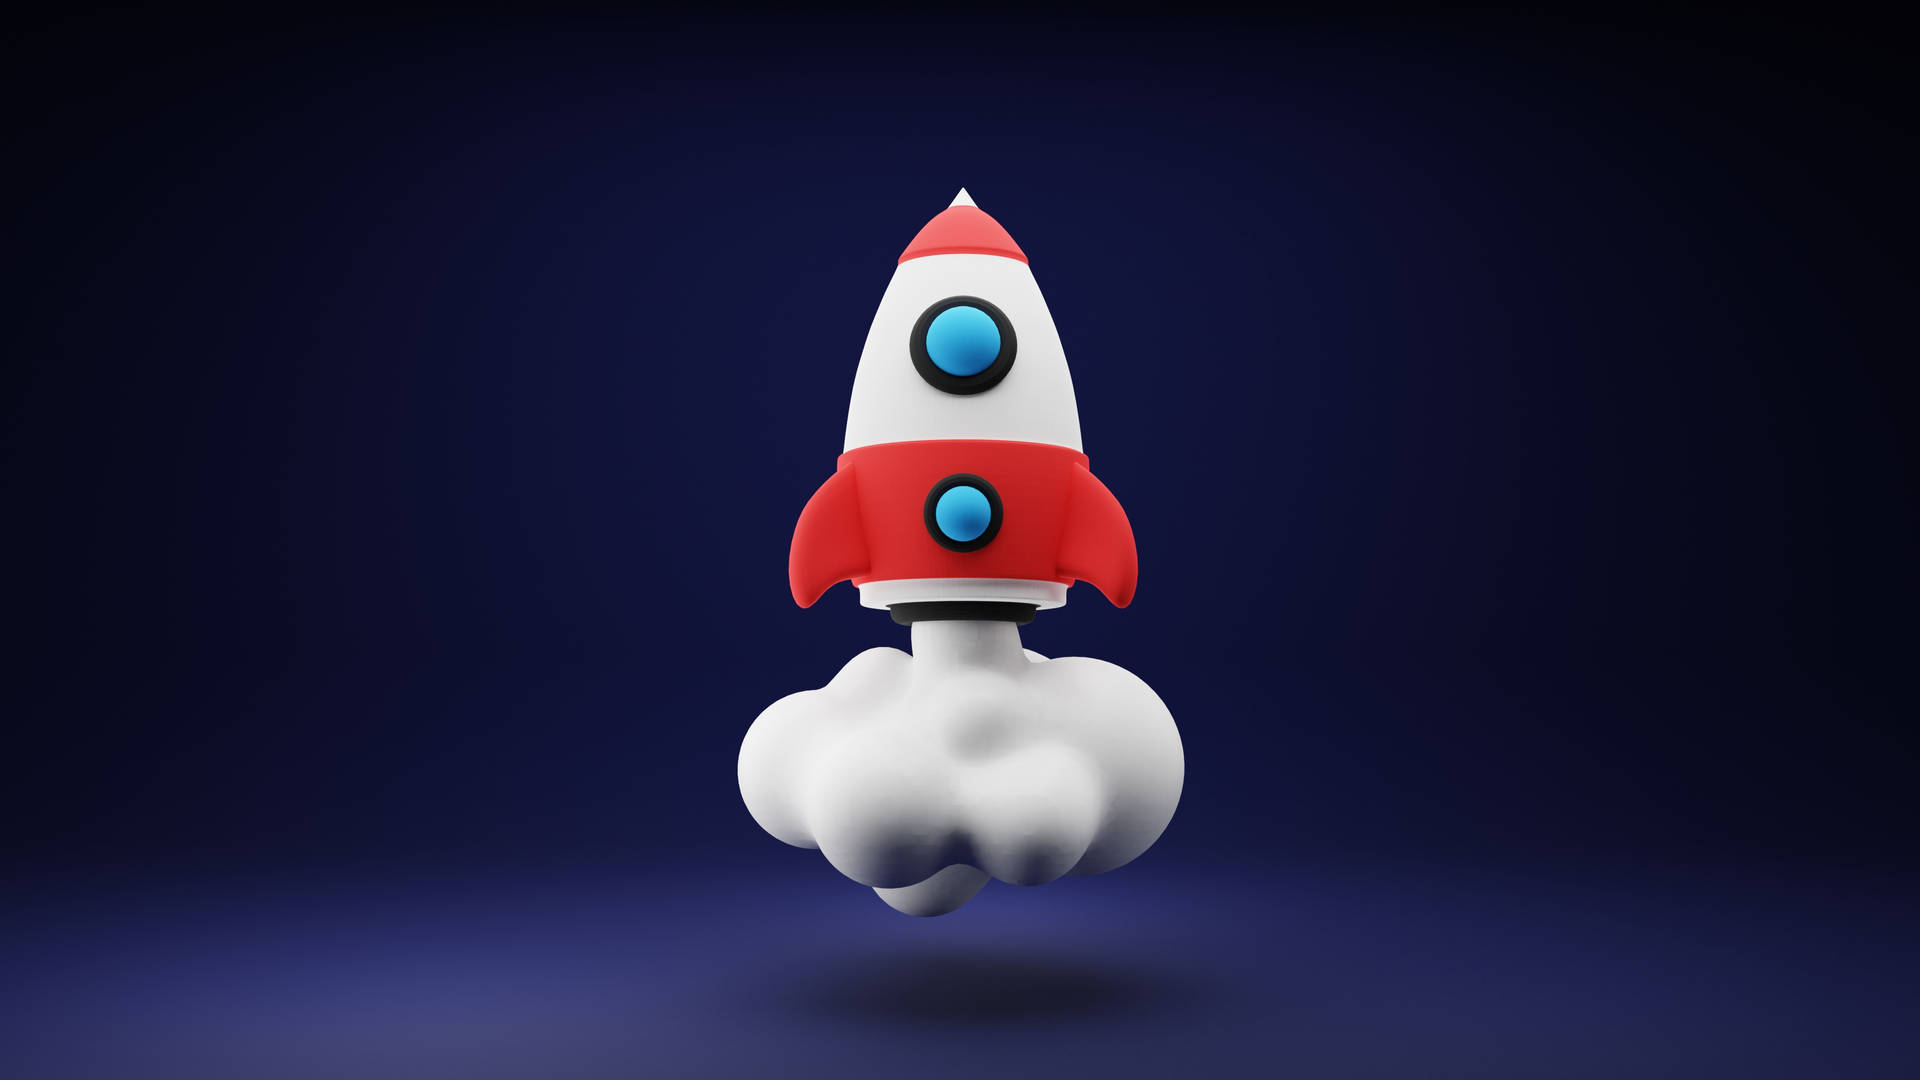 Rocket 3840X2160 Wallpaper and Background Image